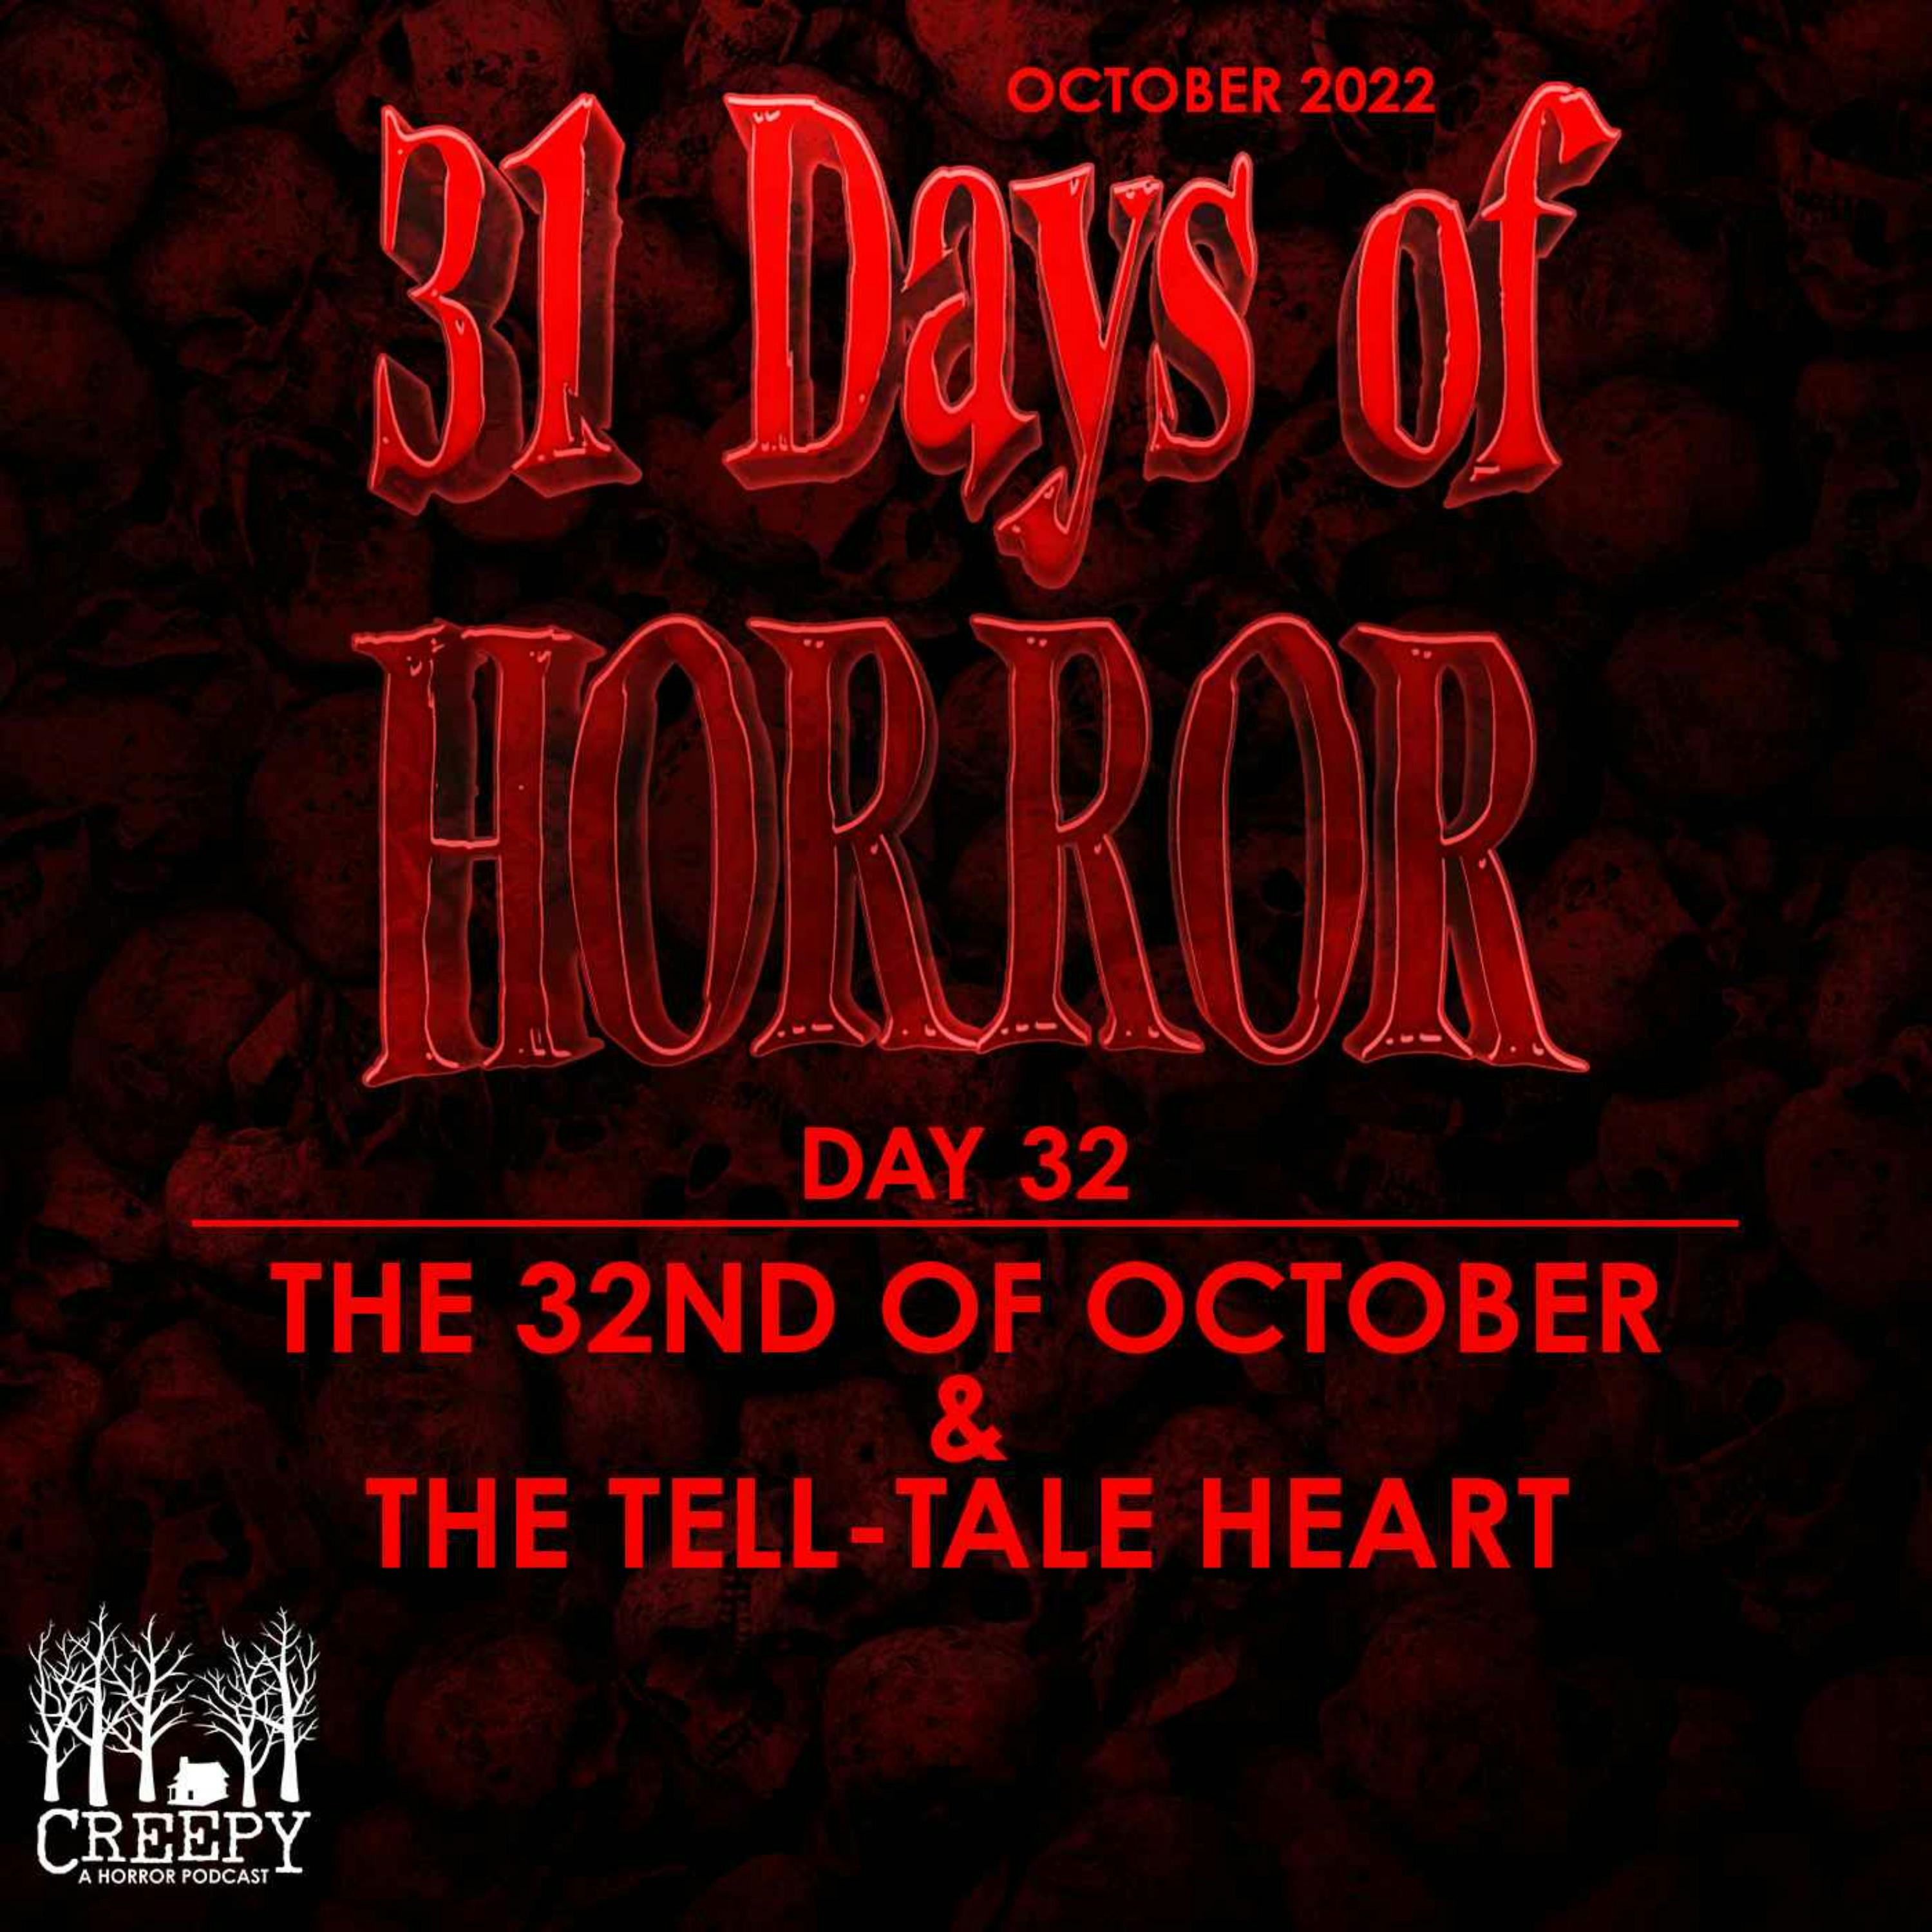 Day 32 - The 32nd of October & The Tell-Tale Heart